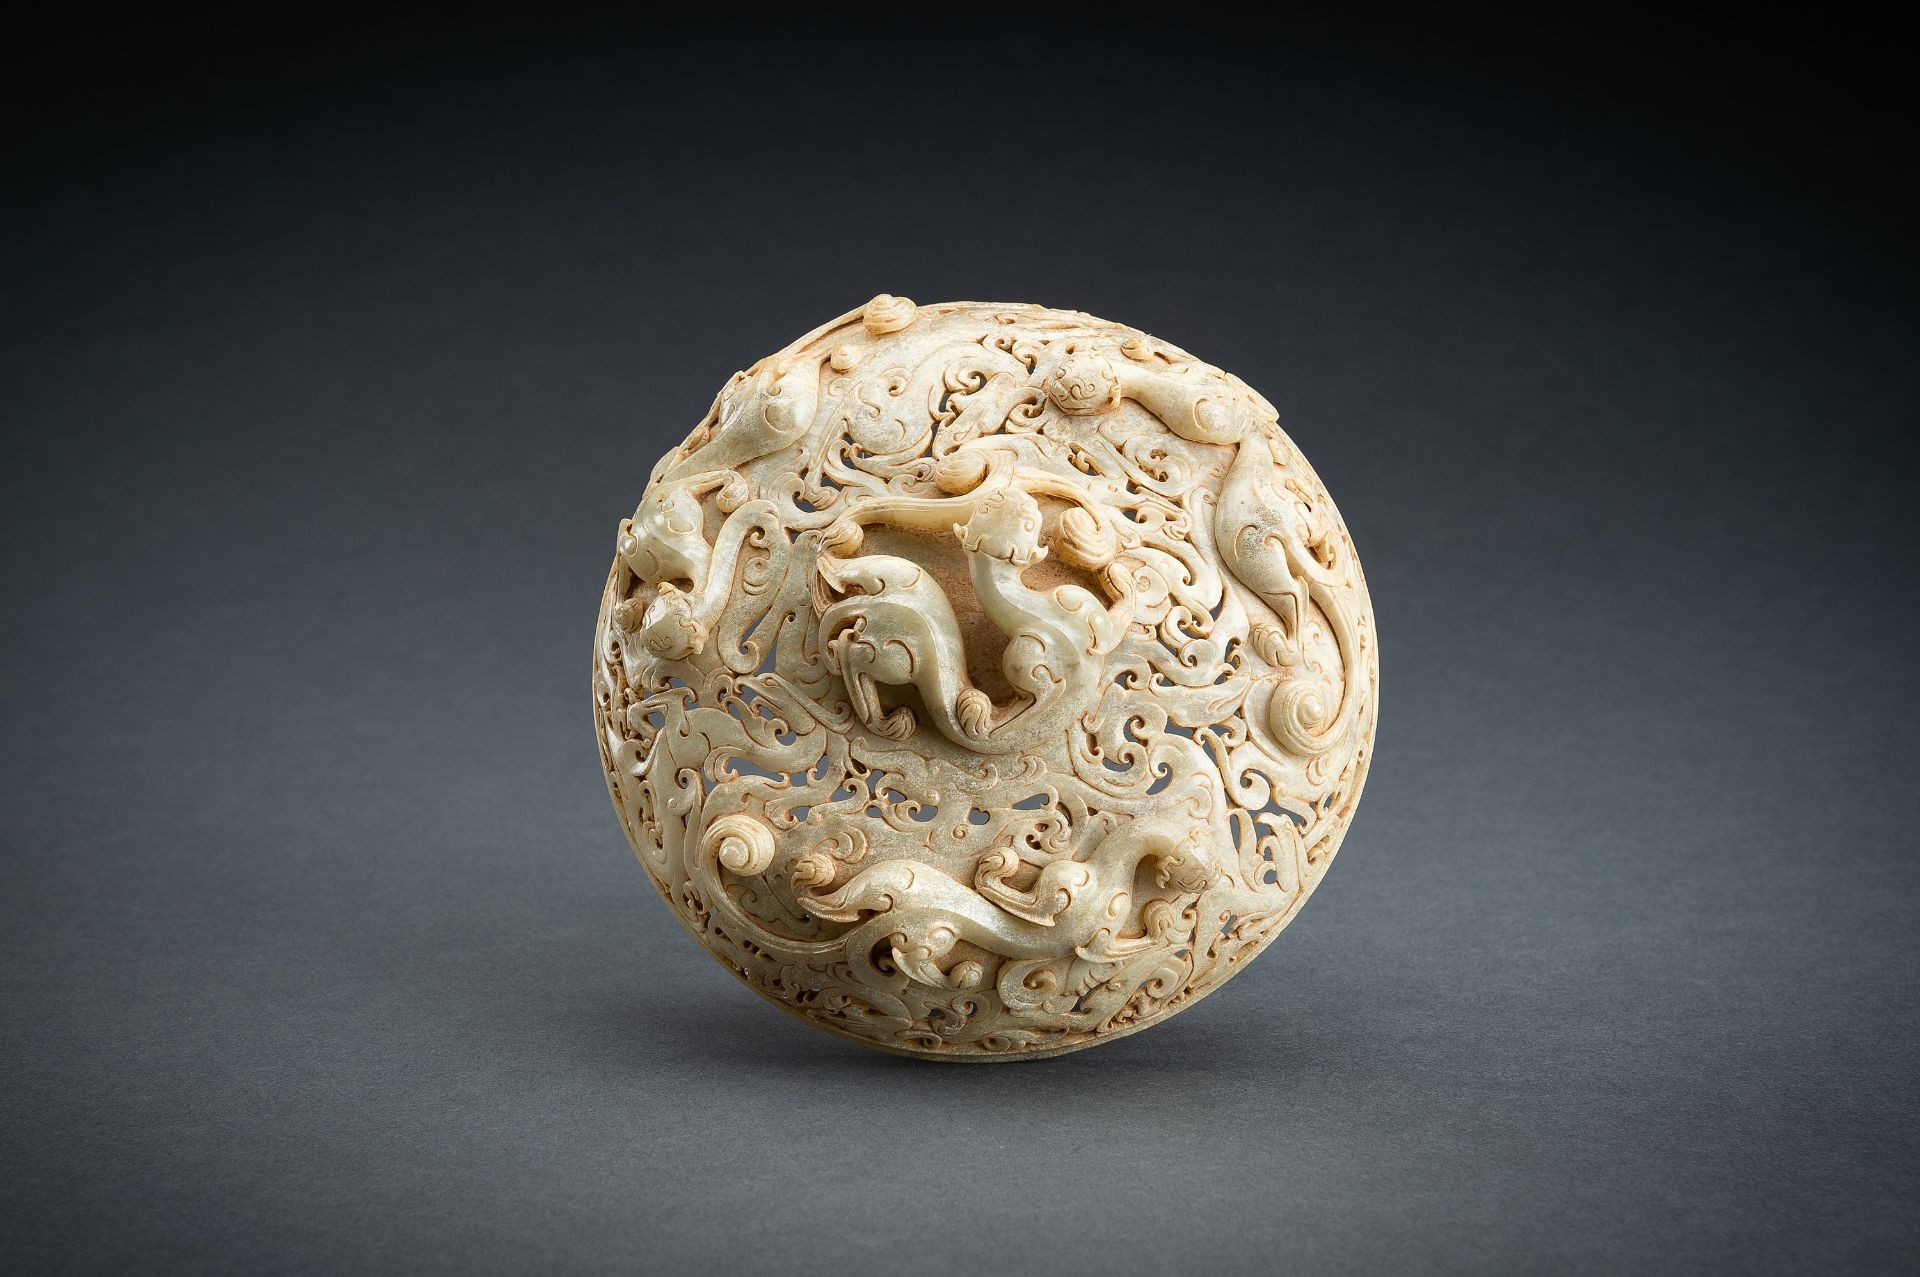 A LARGE AND IMPRESSIVE 3-PART RETICULATED CELADON JADE VESSEL - Image 17 of 19